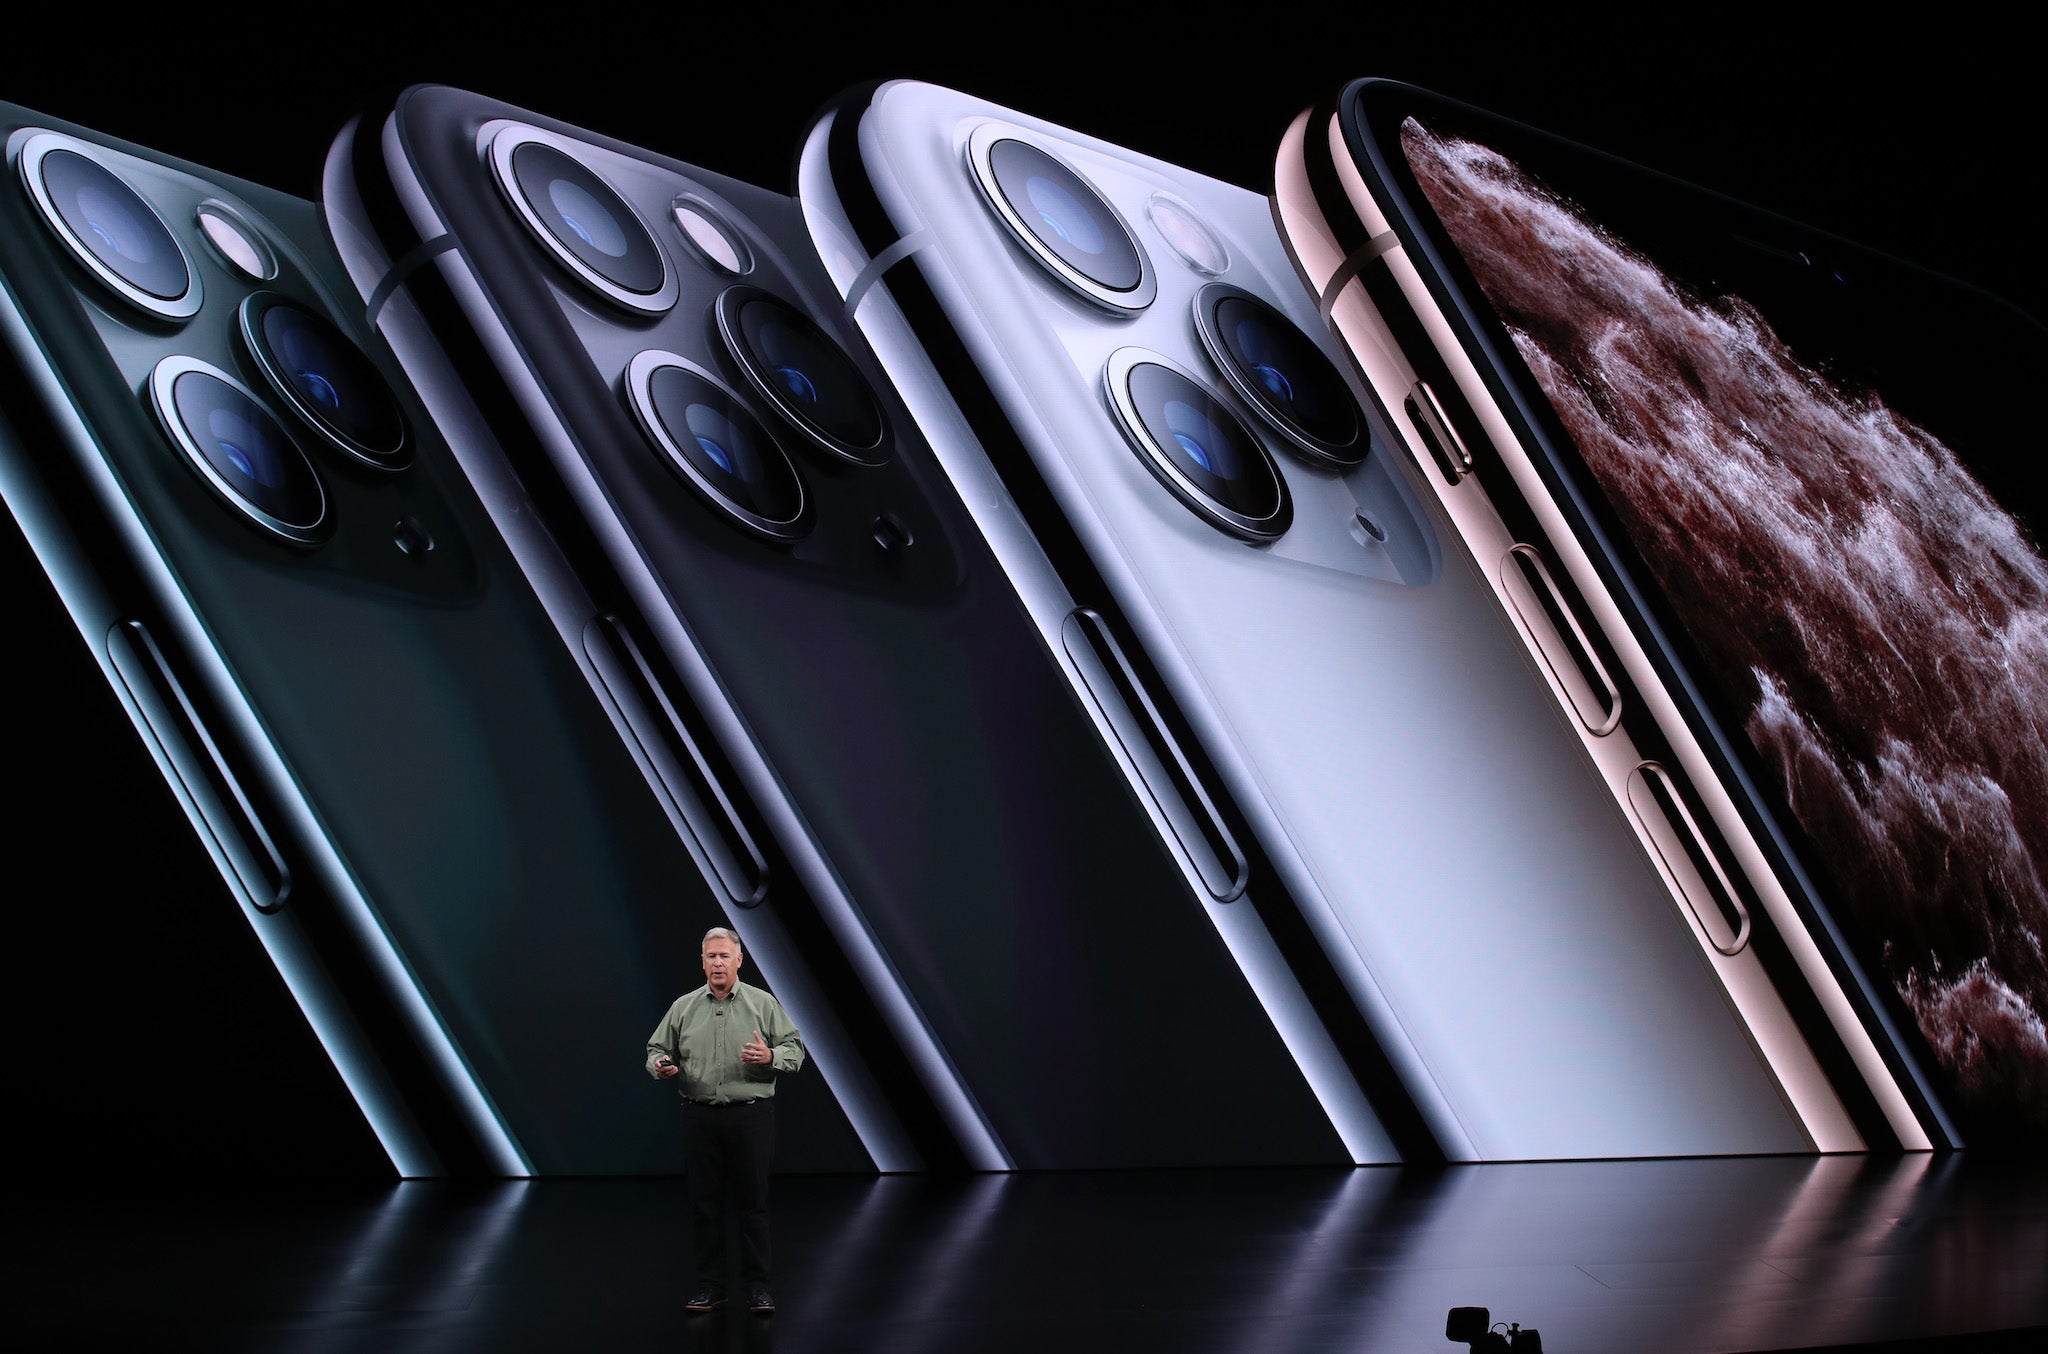 Apple's senior vice president of worldwide marketing Phil Schiller talks about the new iPhone 11 Pro during a special event on September 10, 2019 in the Steve Jobs Theater on Apple's Cupertino, California campus